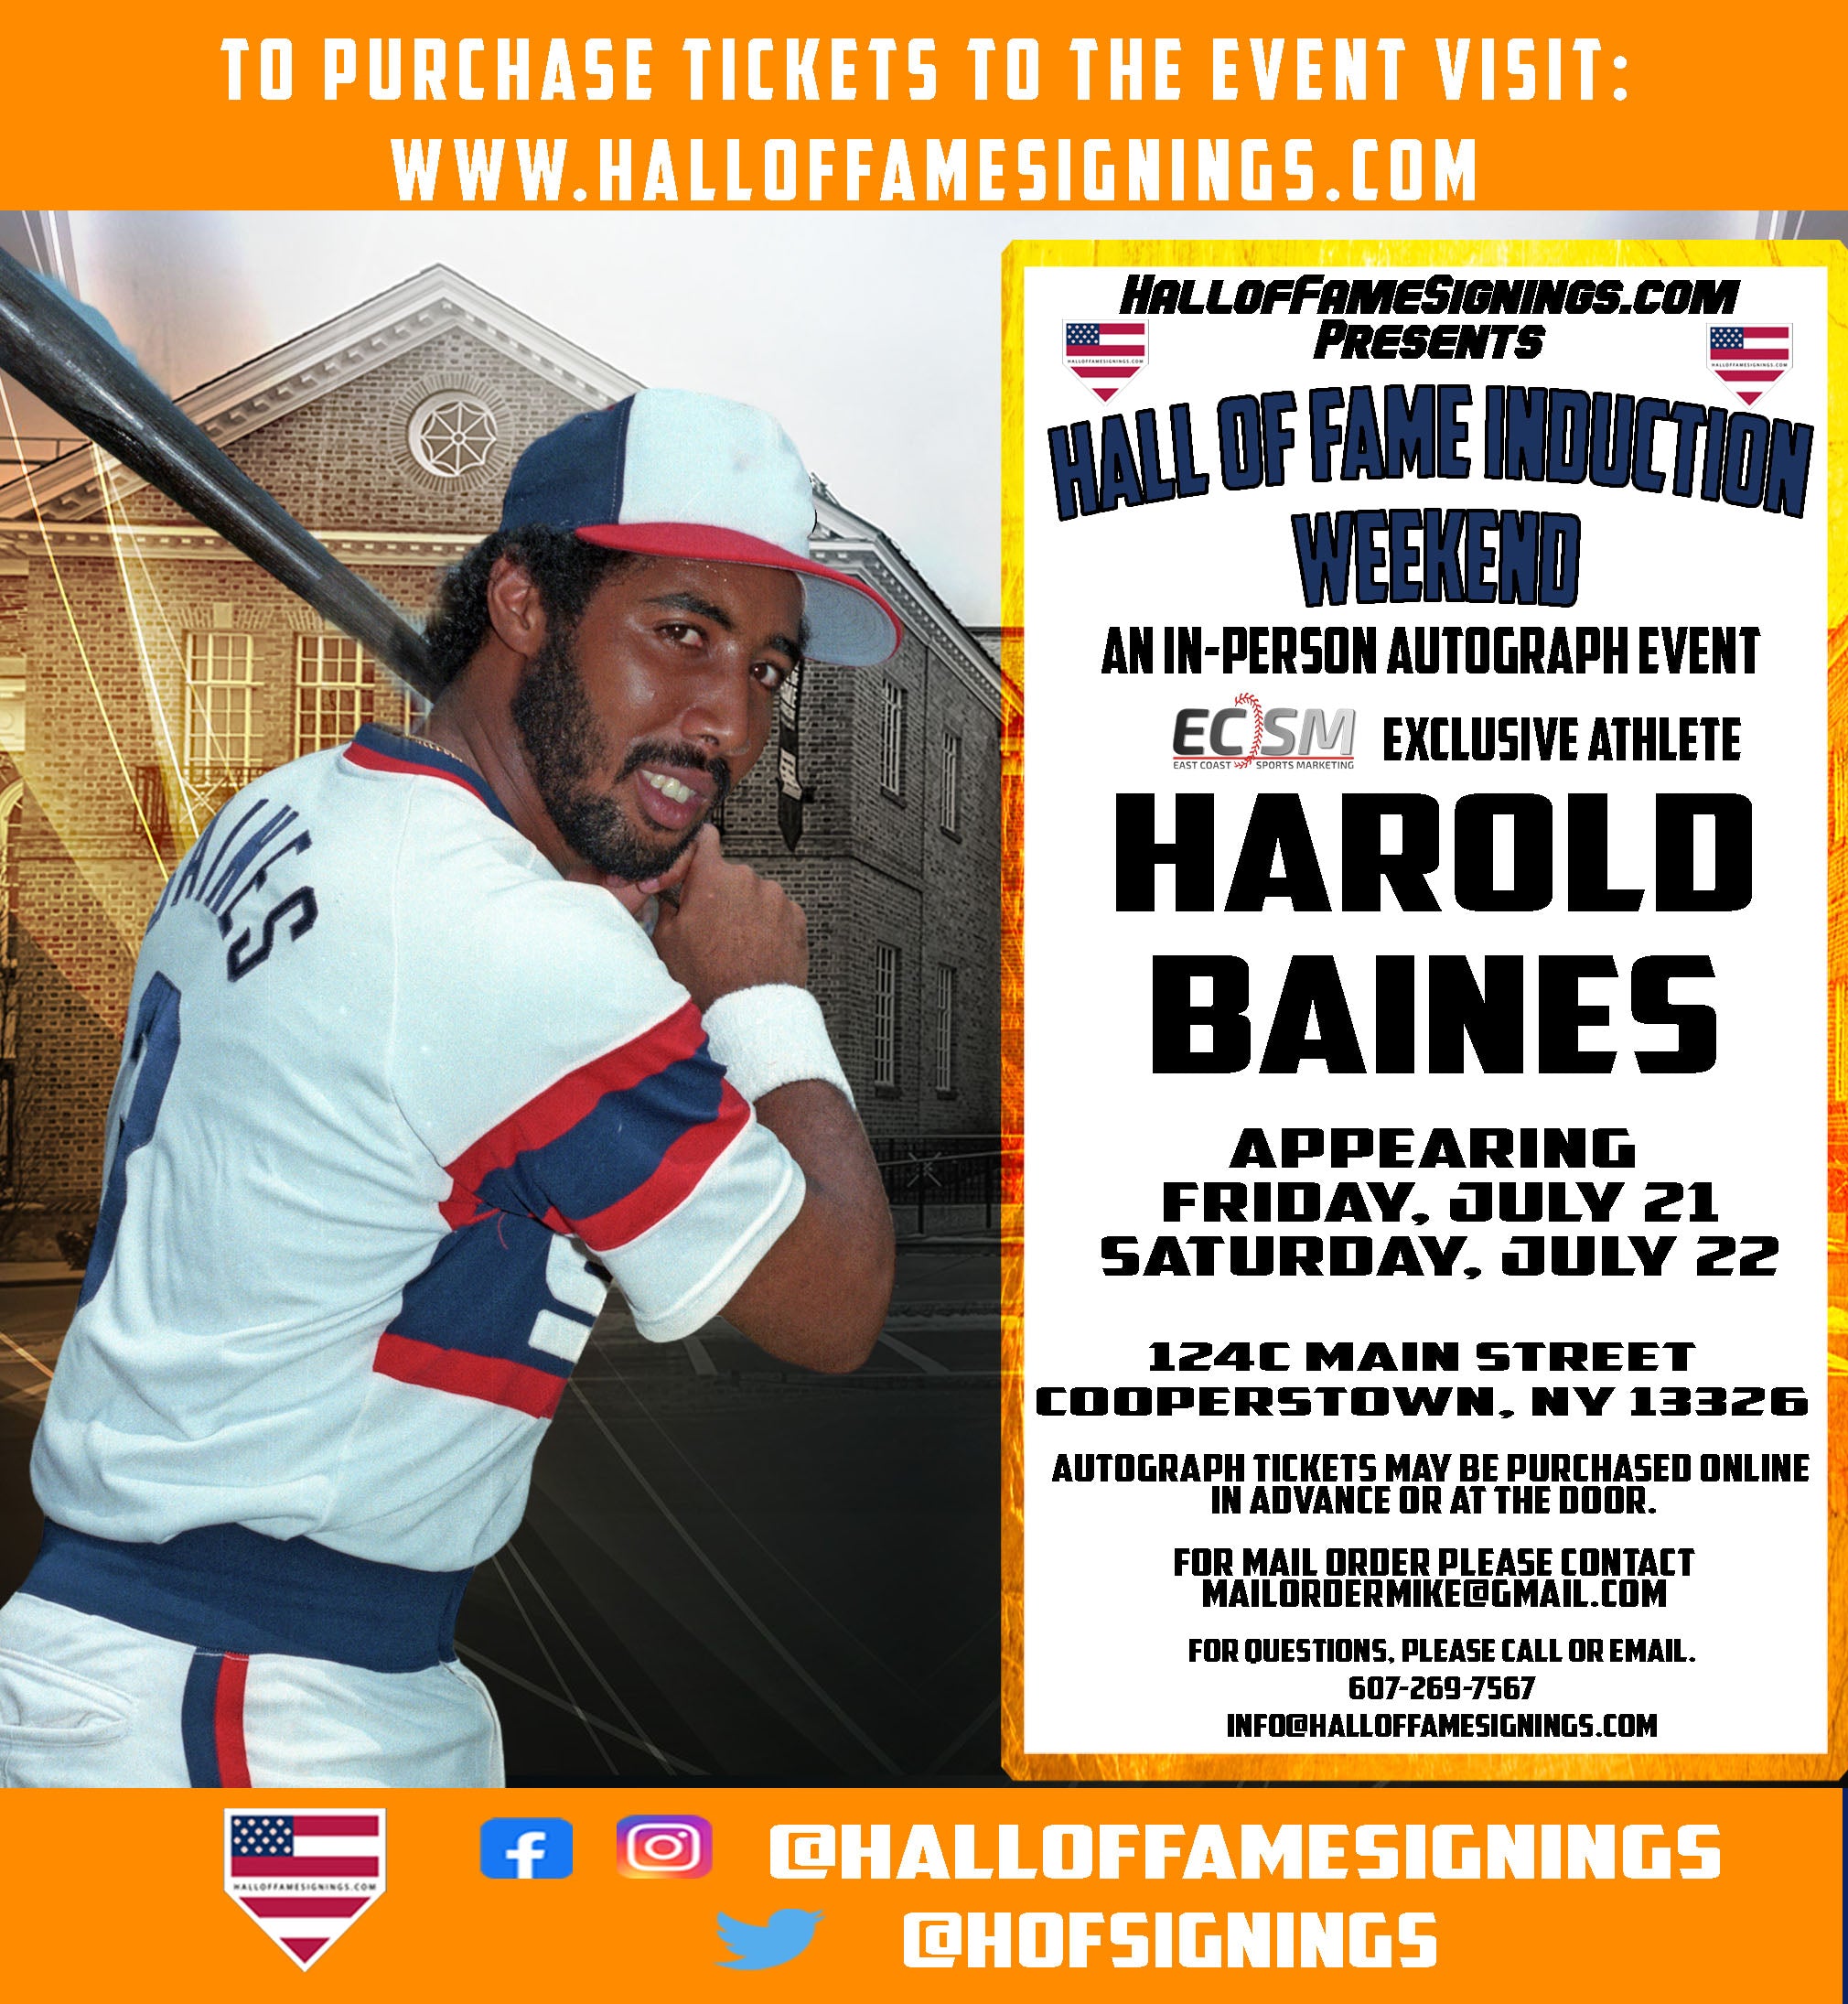 Hall of Fame Signings